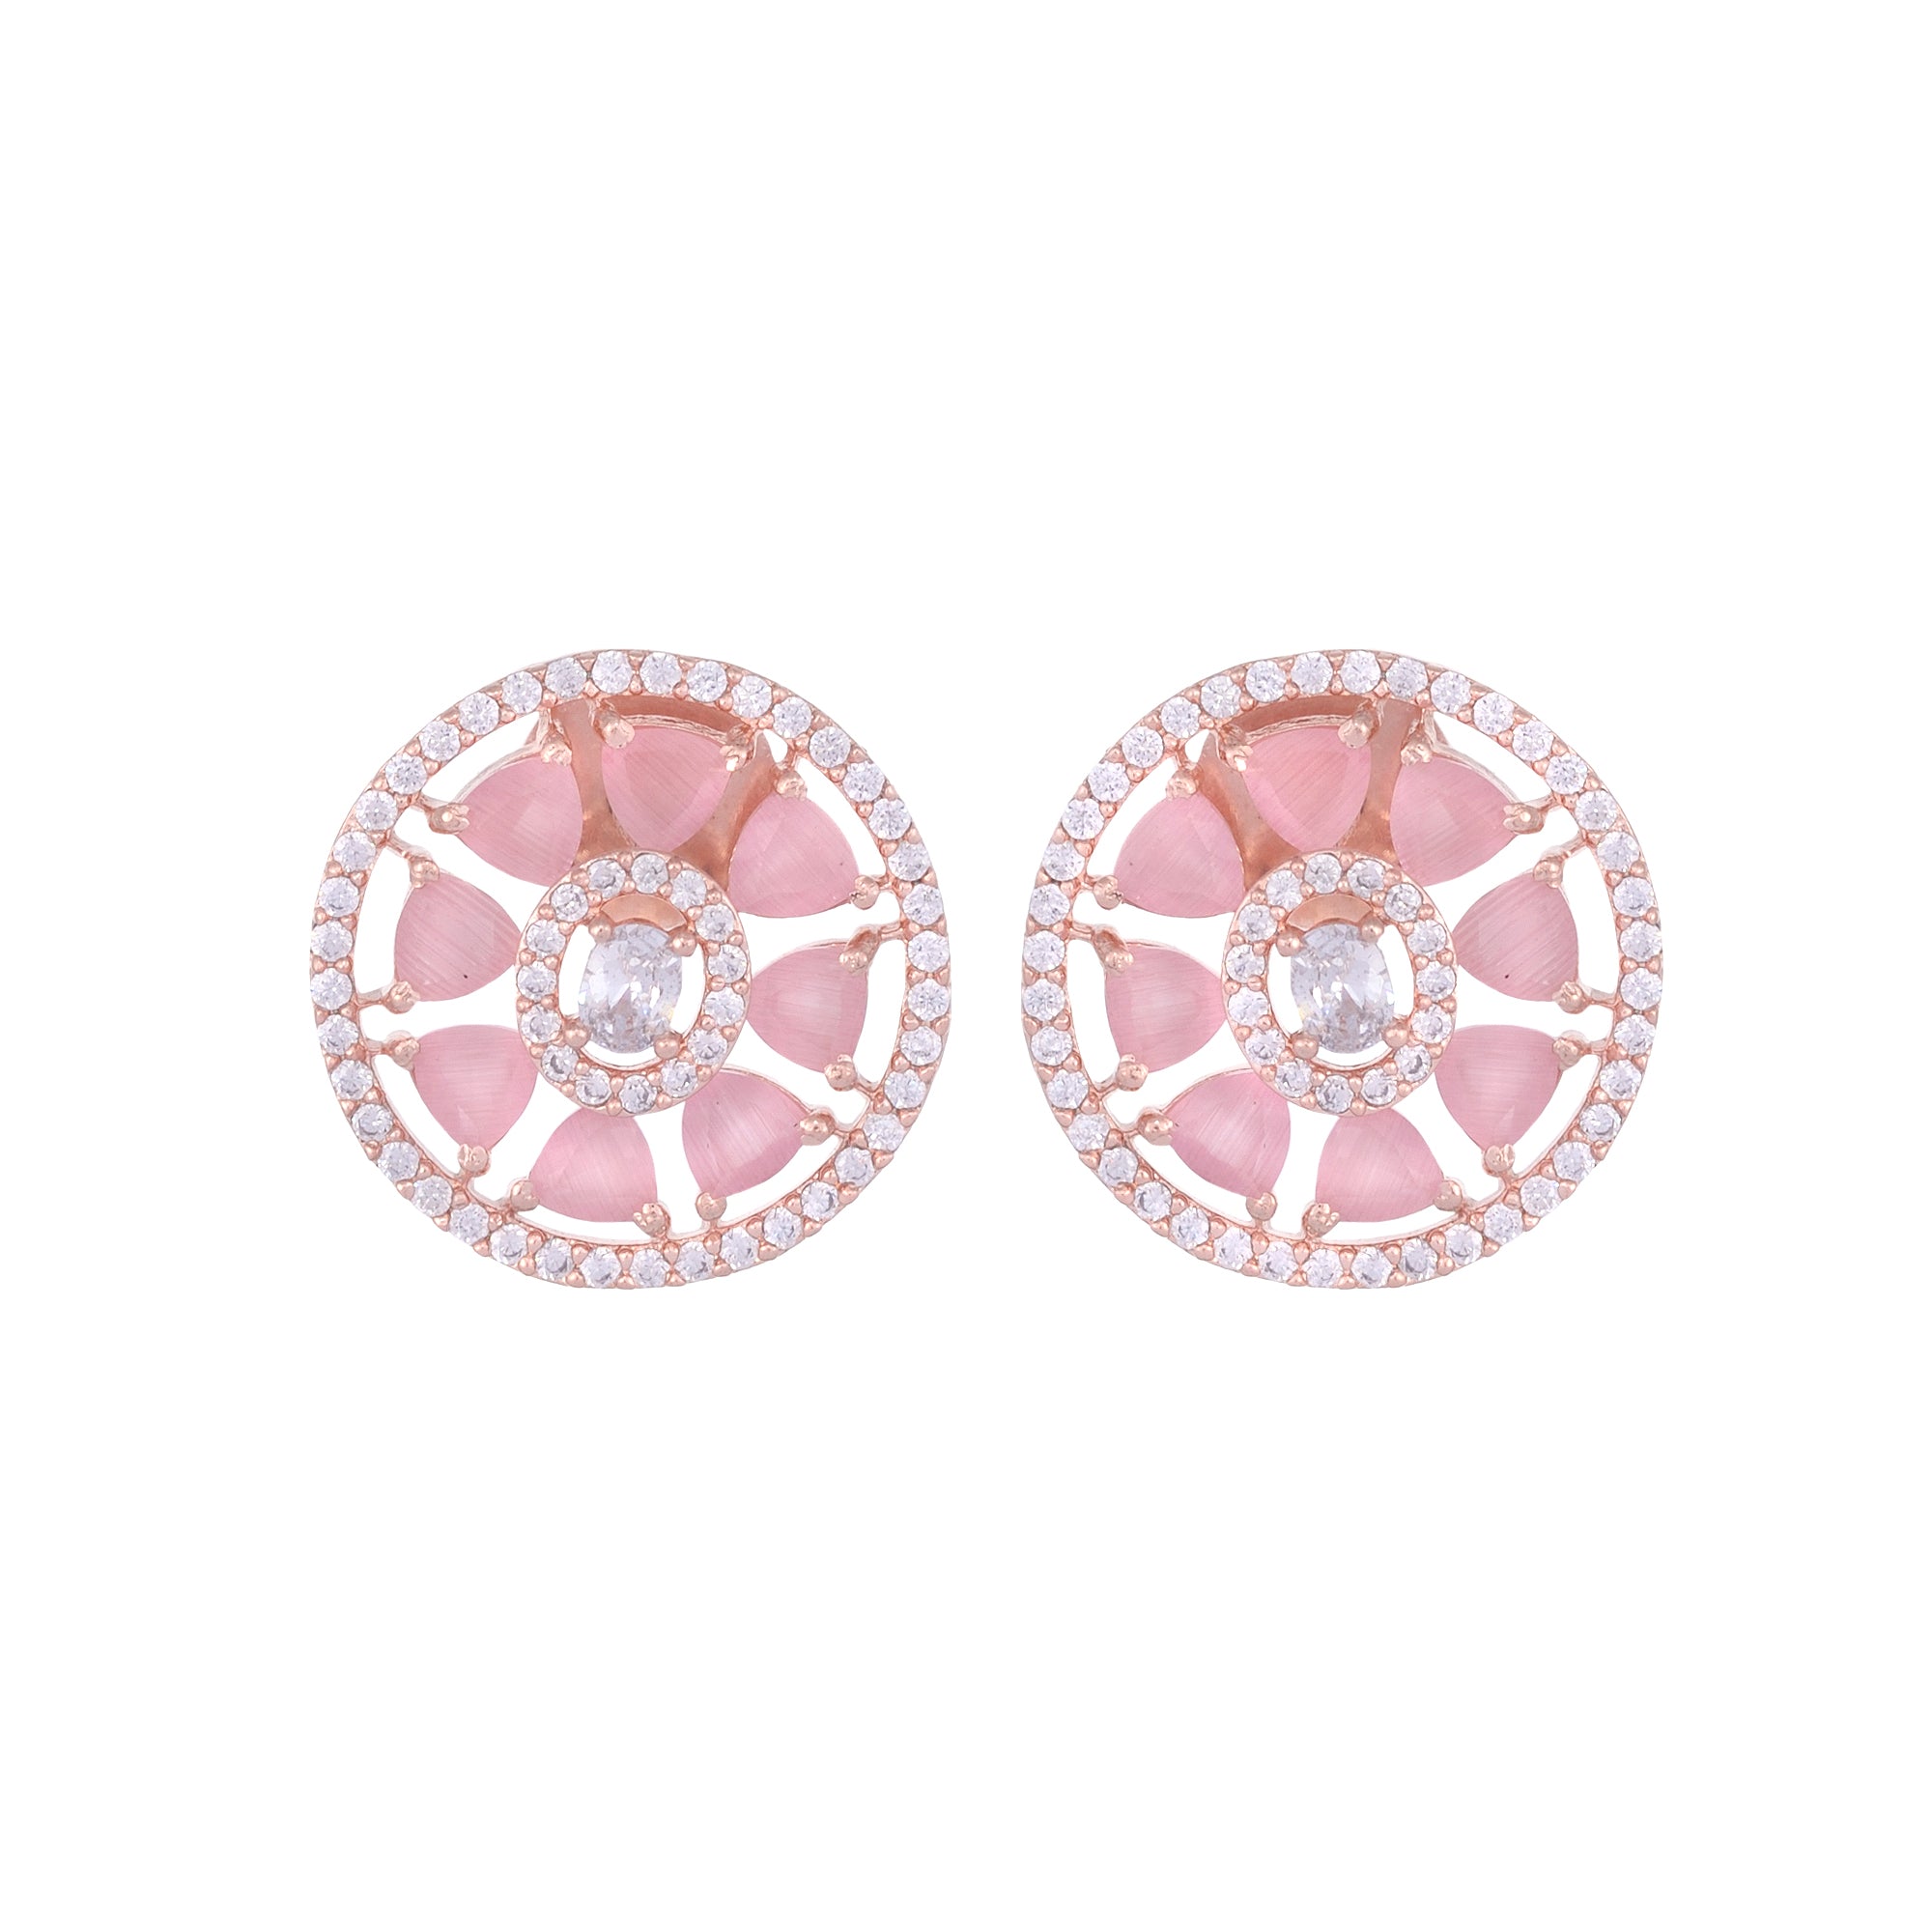 Elegant Pastel Pink Floral Studs Ad Encrusted Rose Gold Plated Small Earrings for Women and Girls - Saraf RS Jewellery